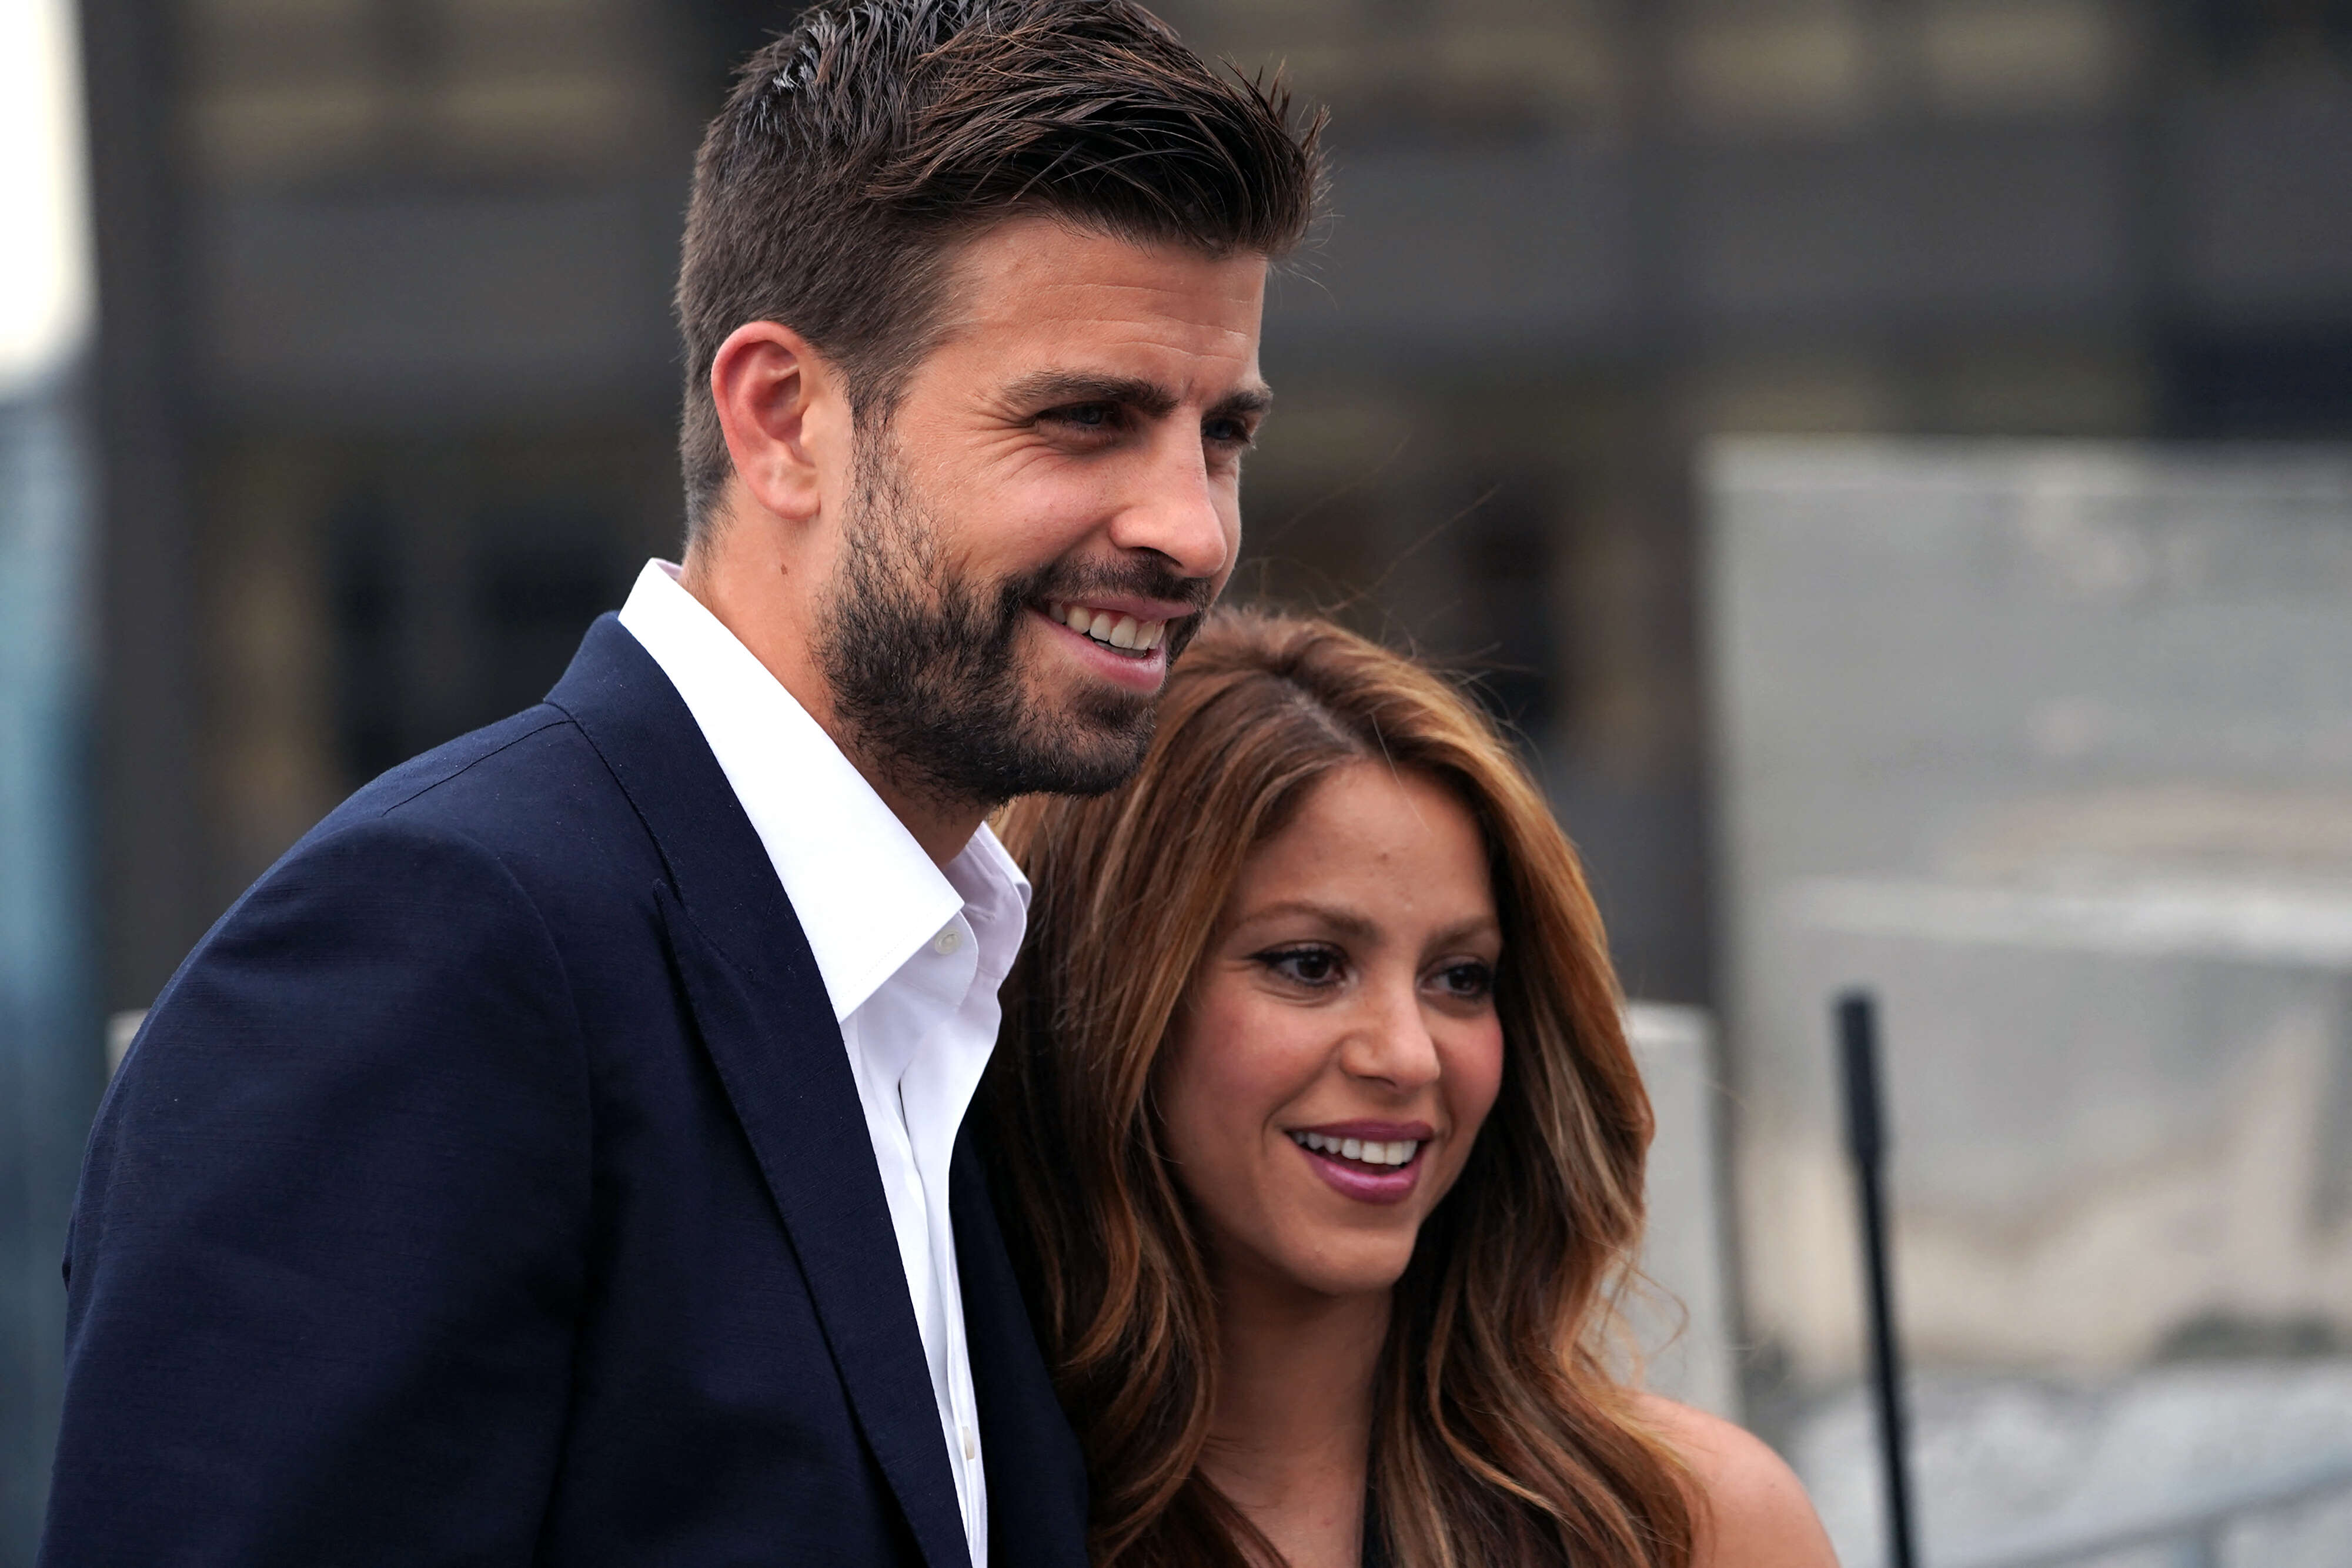 Colombian musician Shakira and partner Kosmoa Founder and President, Spanish football player Gerard Pique attend the Davis Cup Presentation on September 5, 2019 in New York.  (Photo by Bryan R. Smith/AFP)